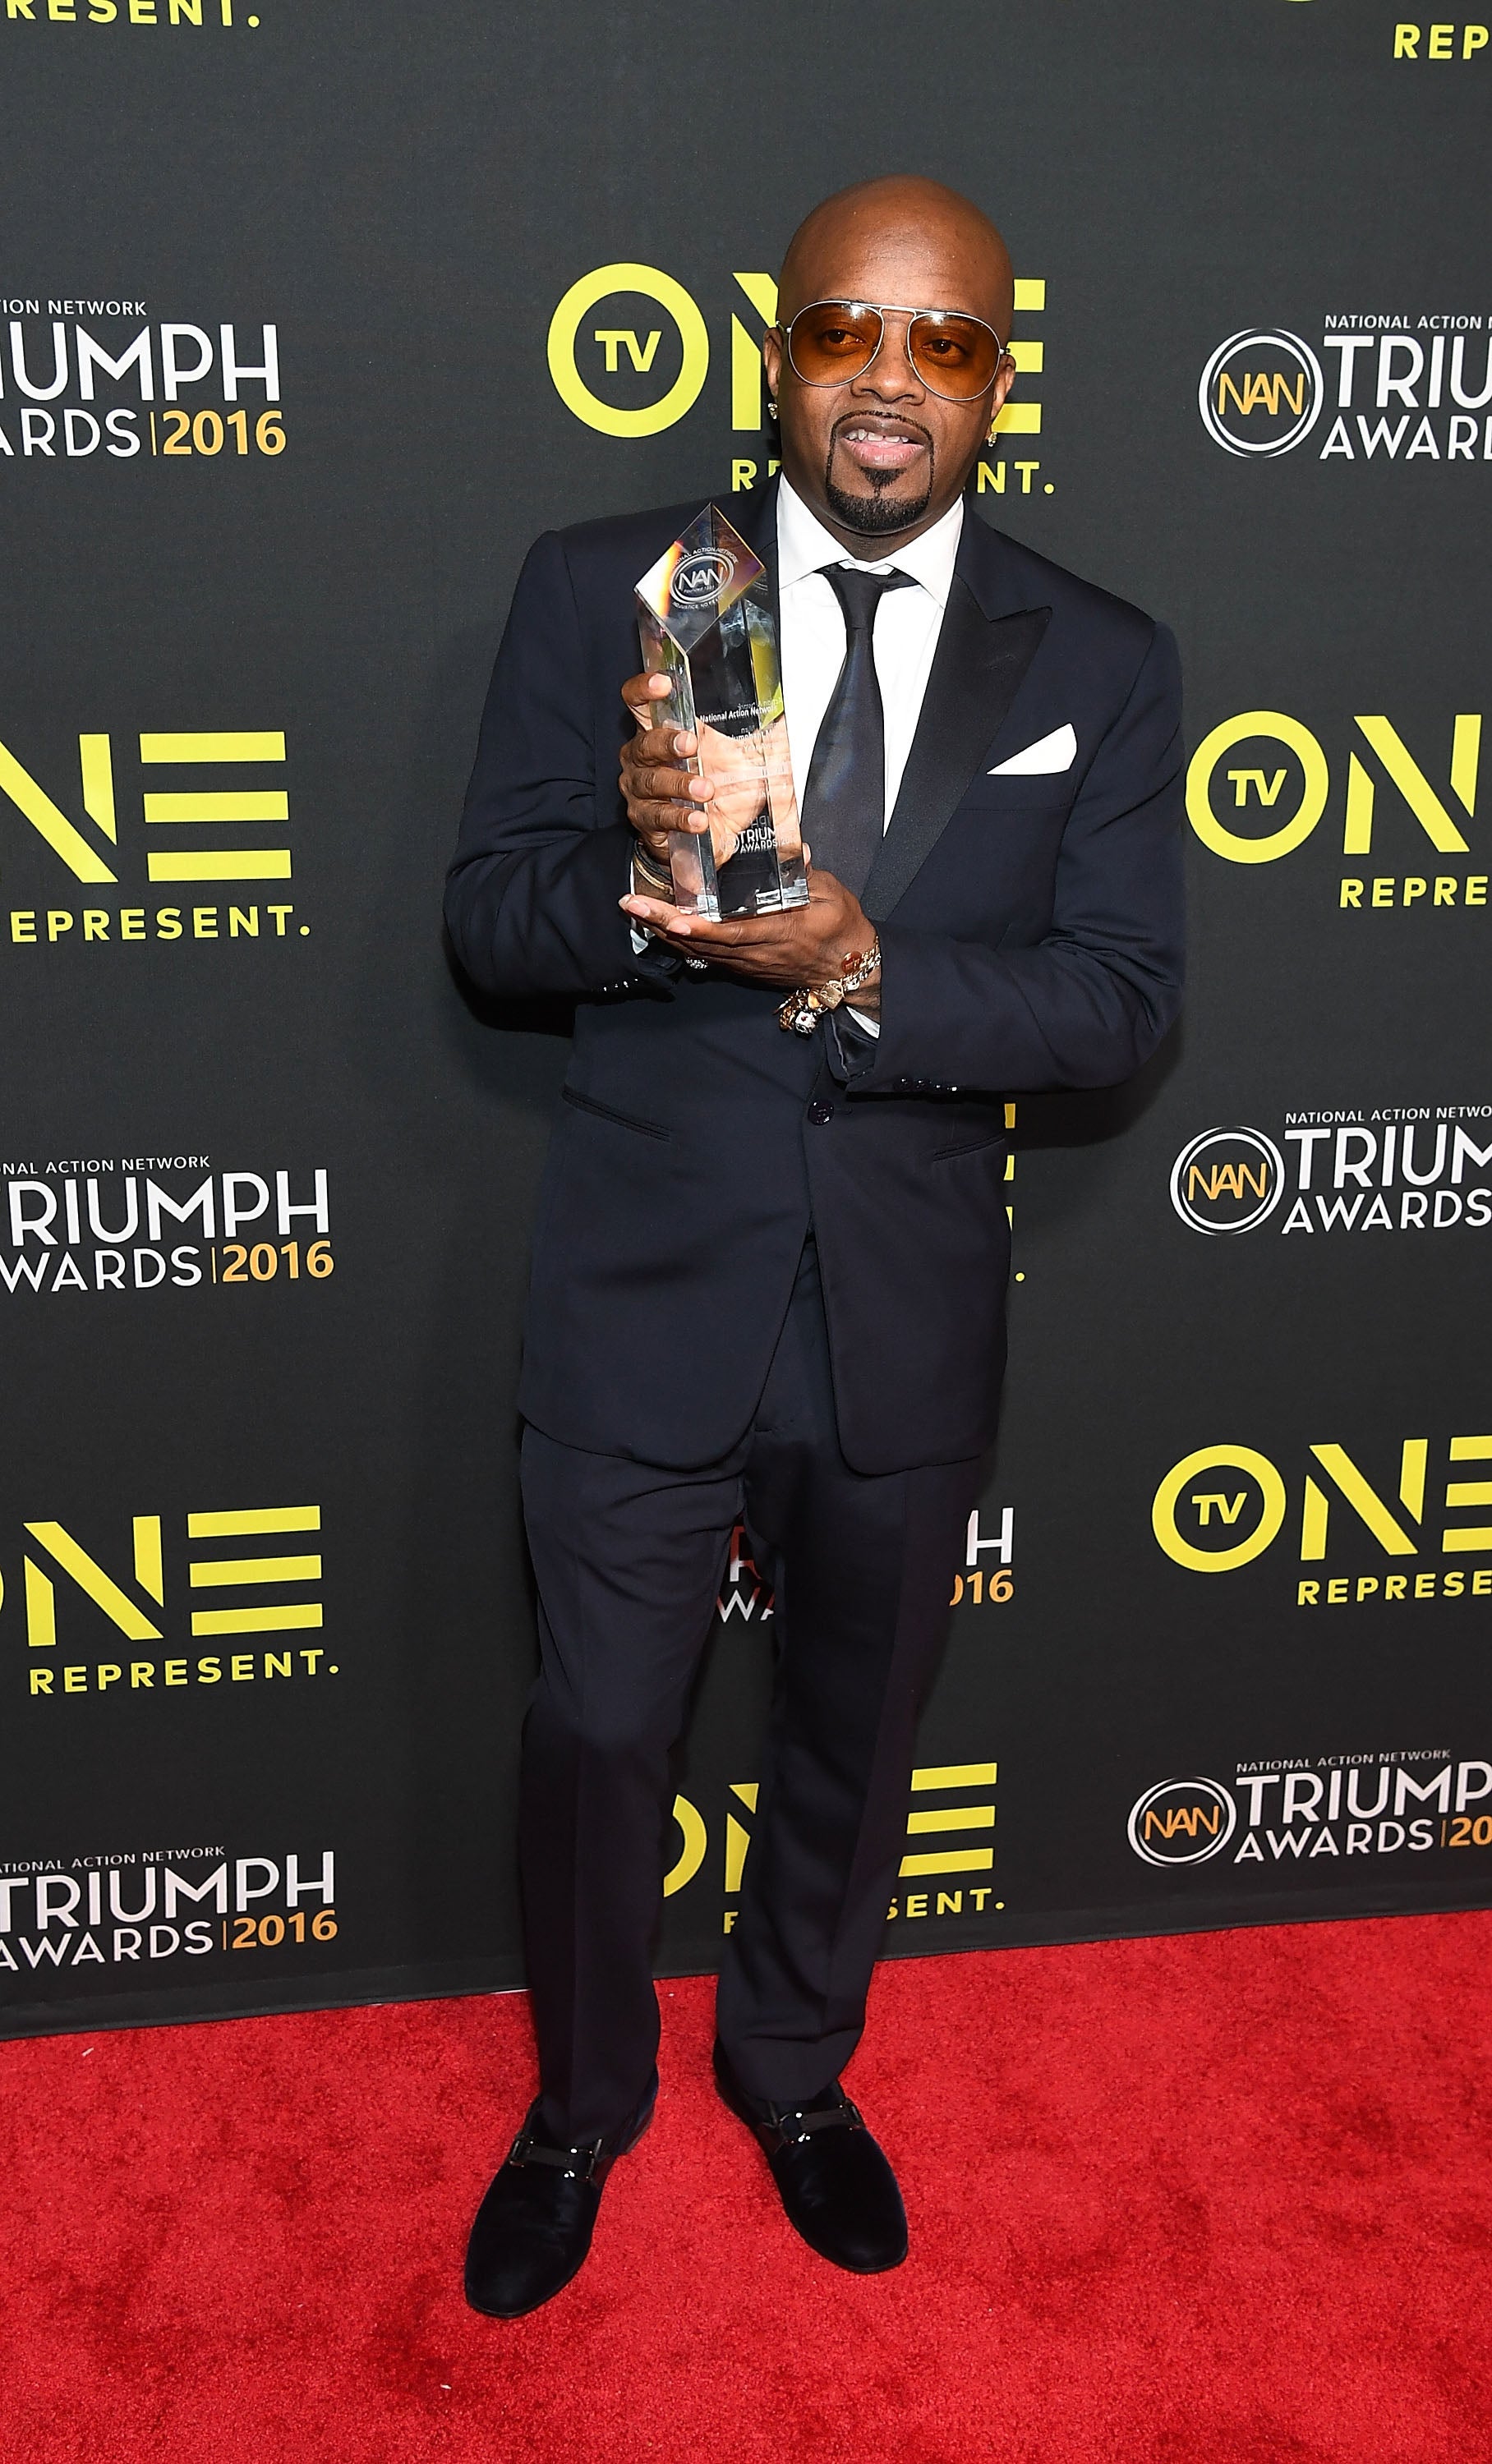 Black Excellence at the 2016 Triumph Awards
